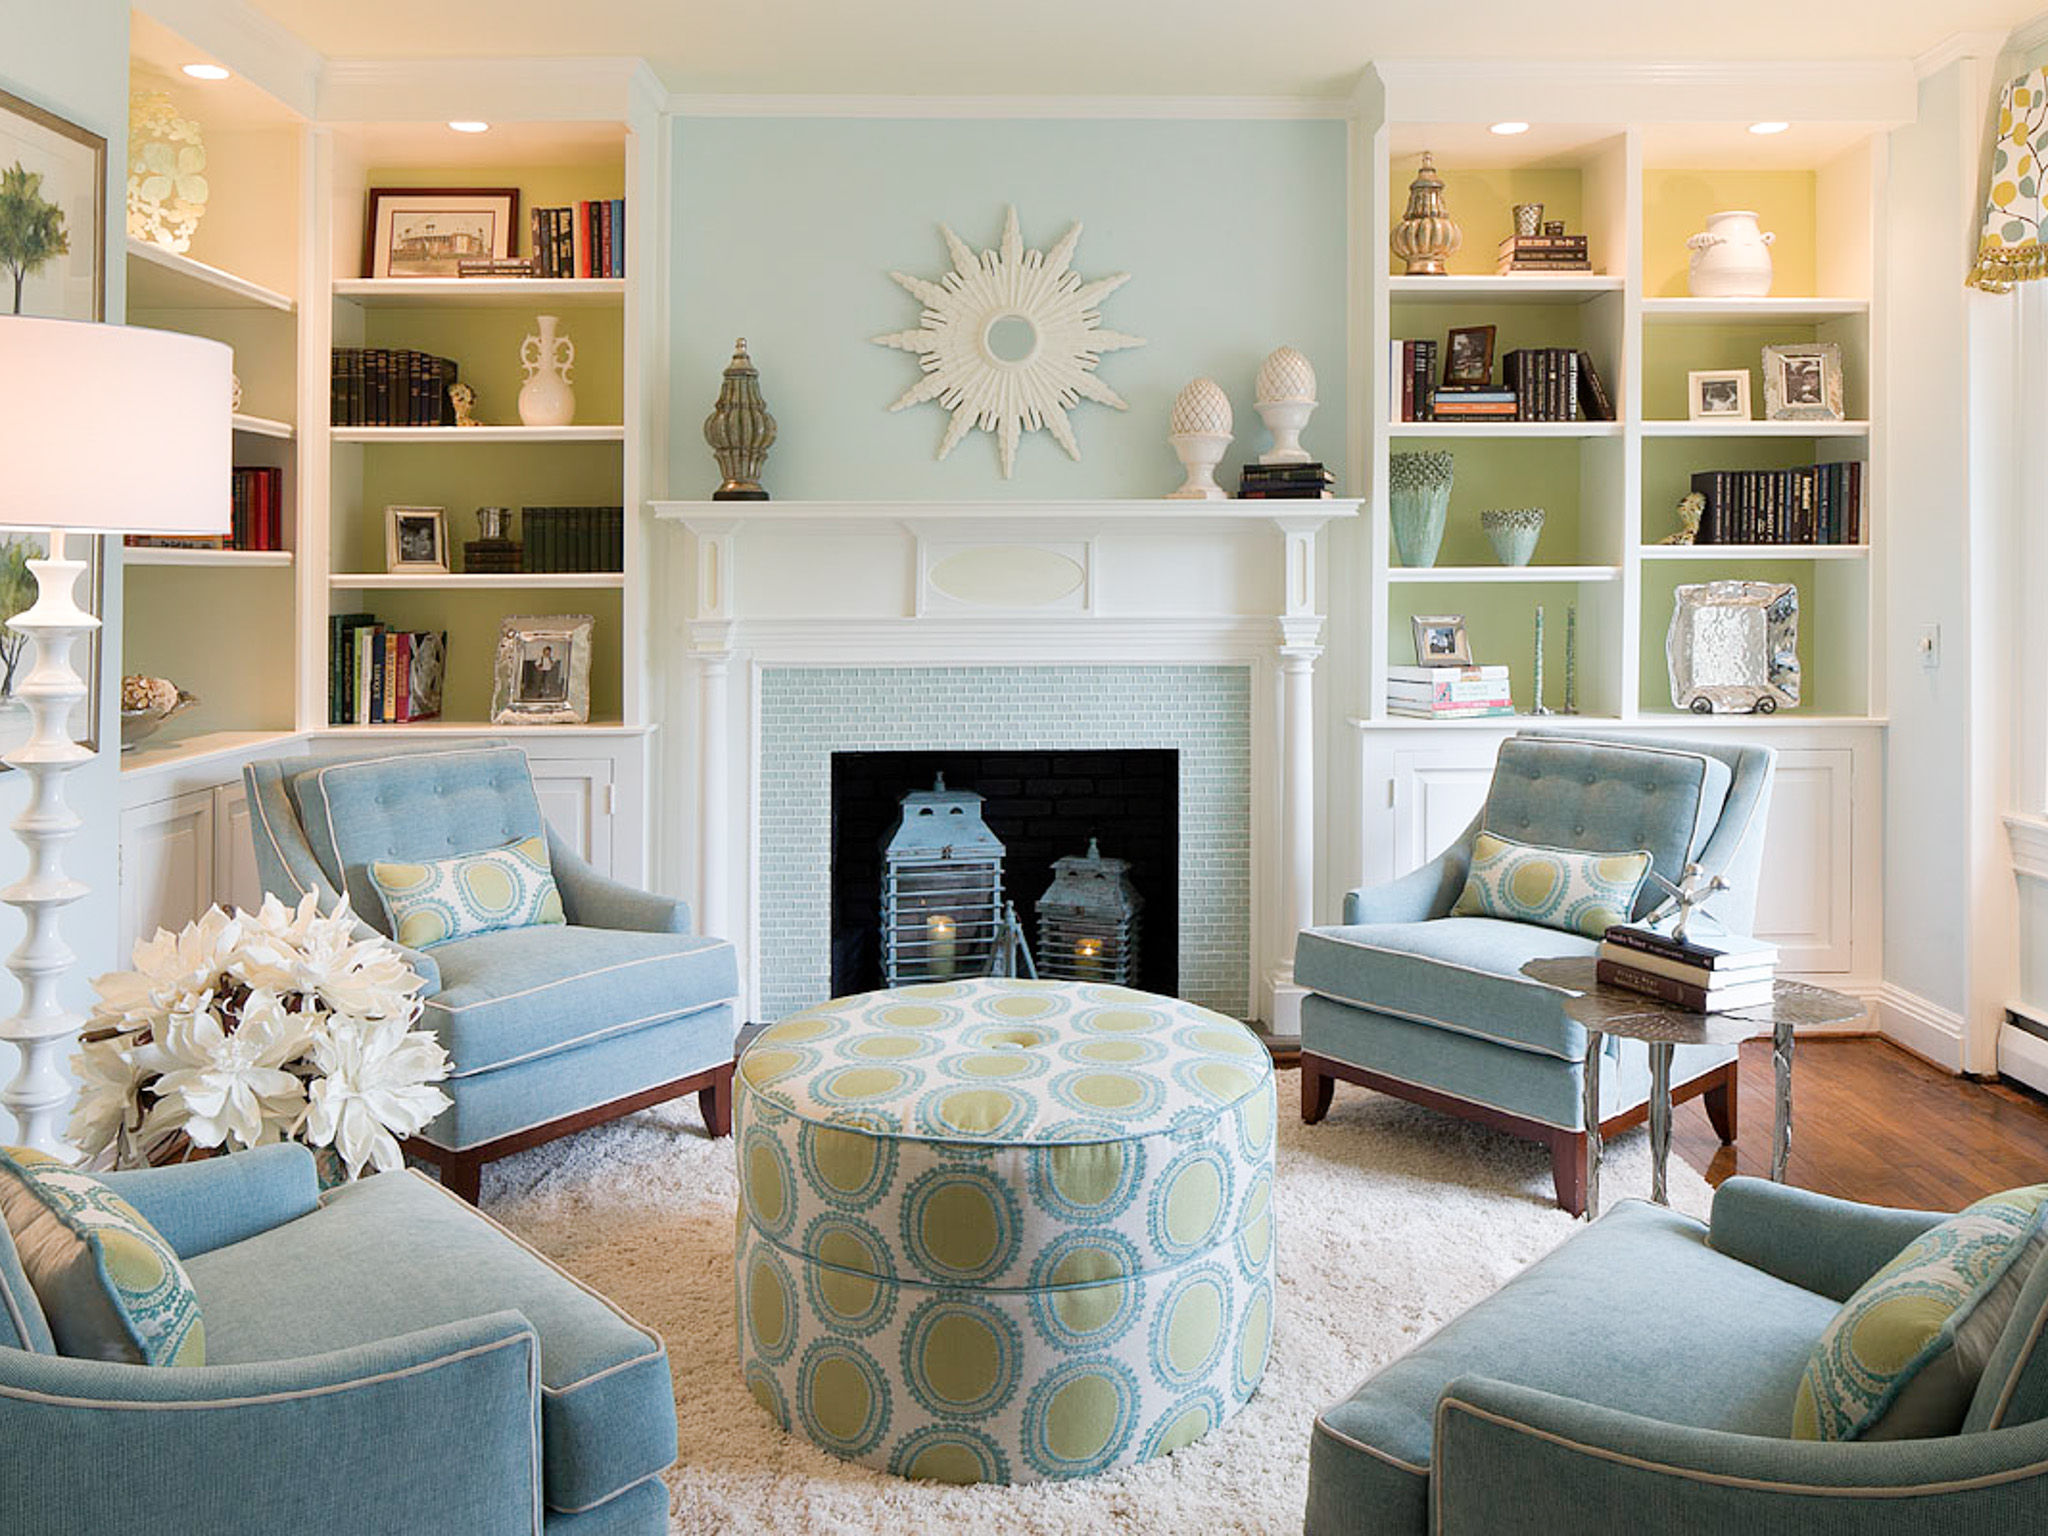 Light blue walls in living room - a pleasant ambient in your home